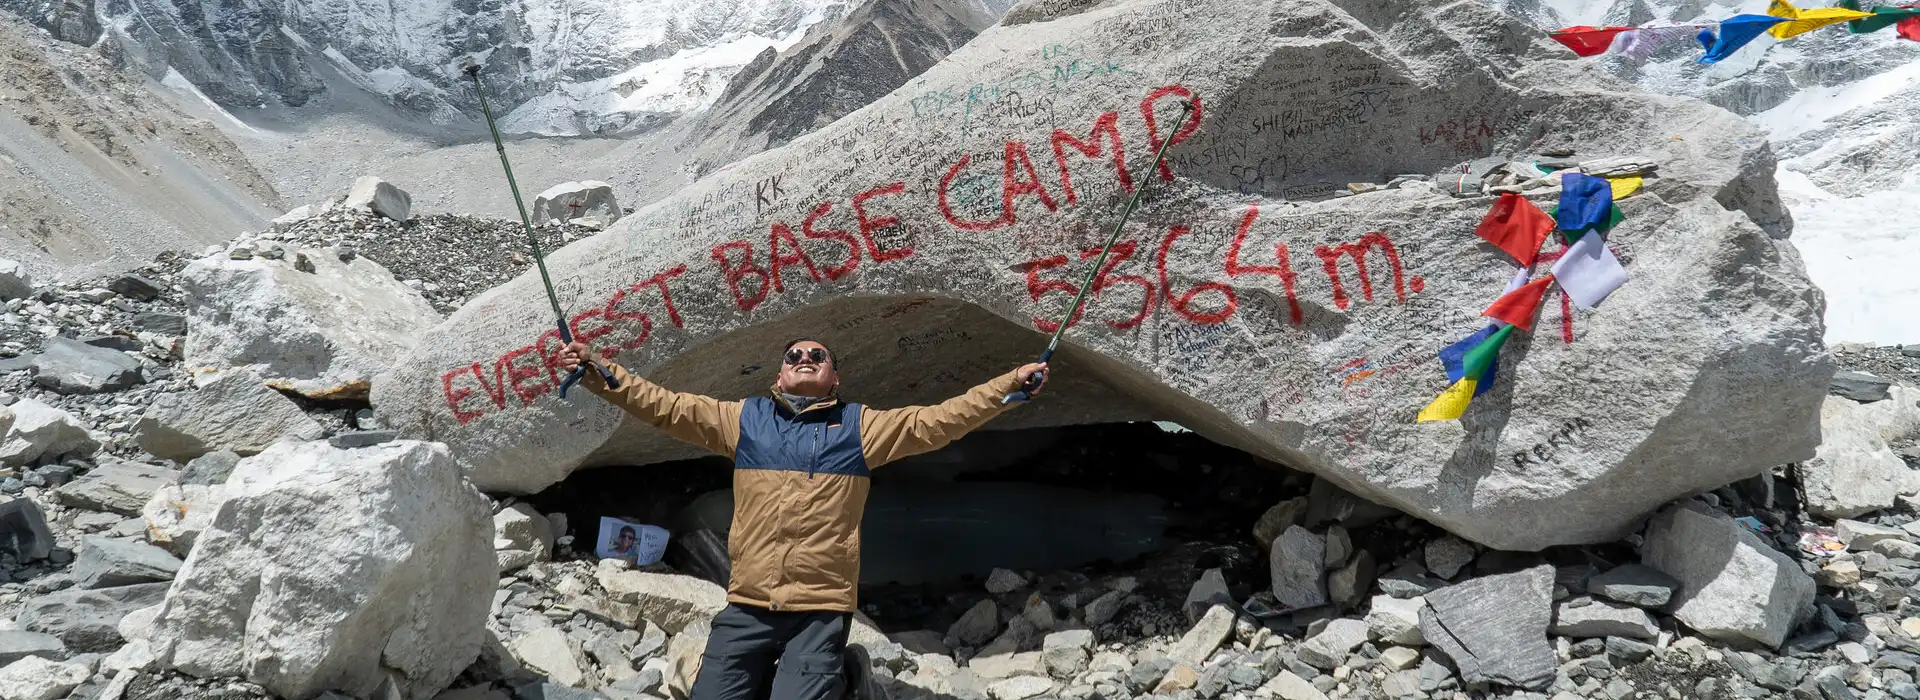 How to train for Everest base camp